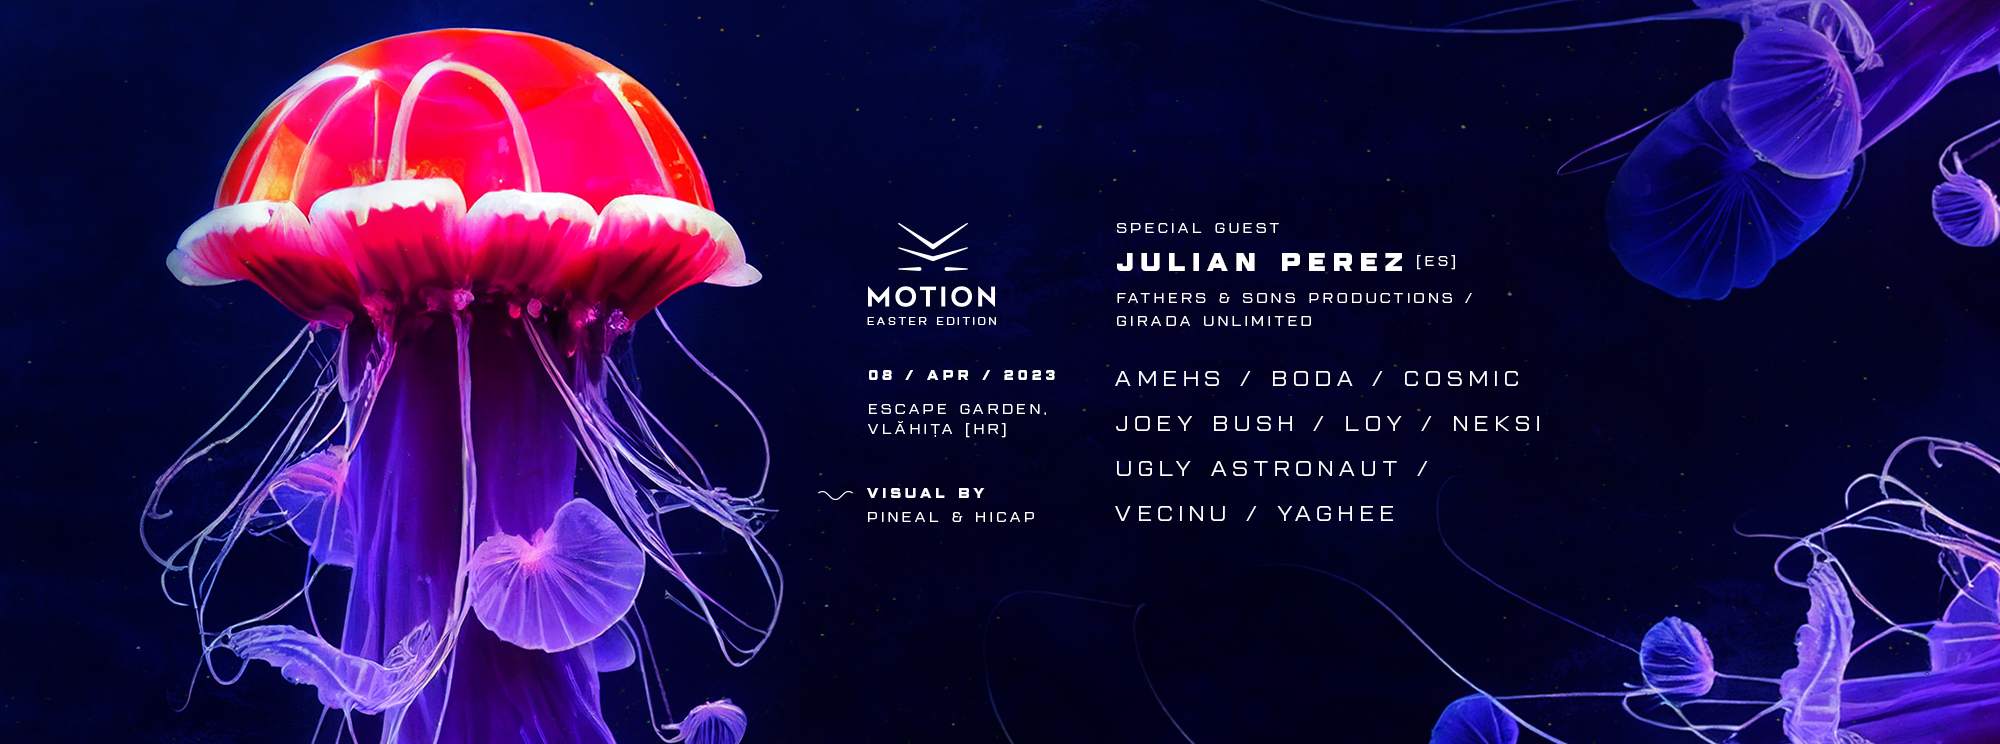 Motion Easter Edition with Julian Perez / LOy - Página trasera